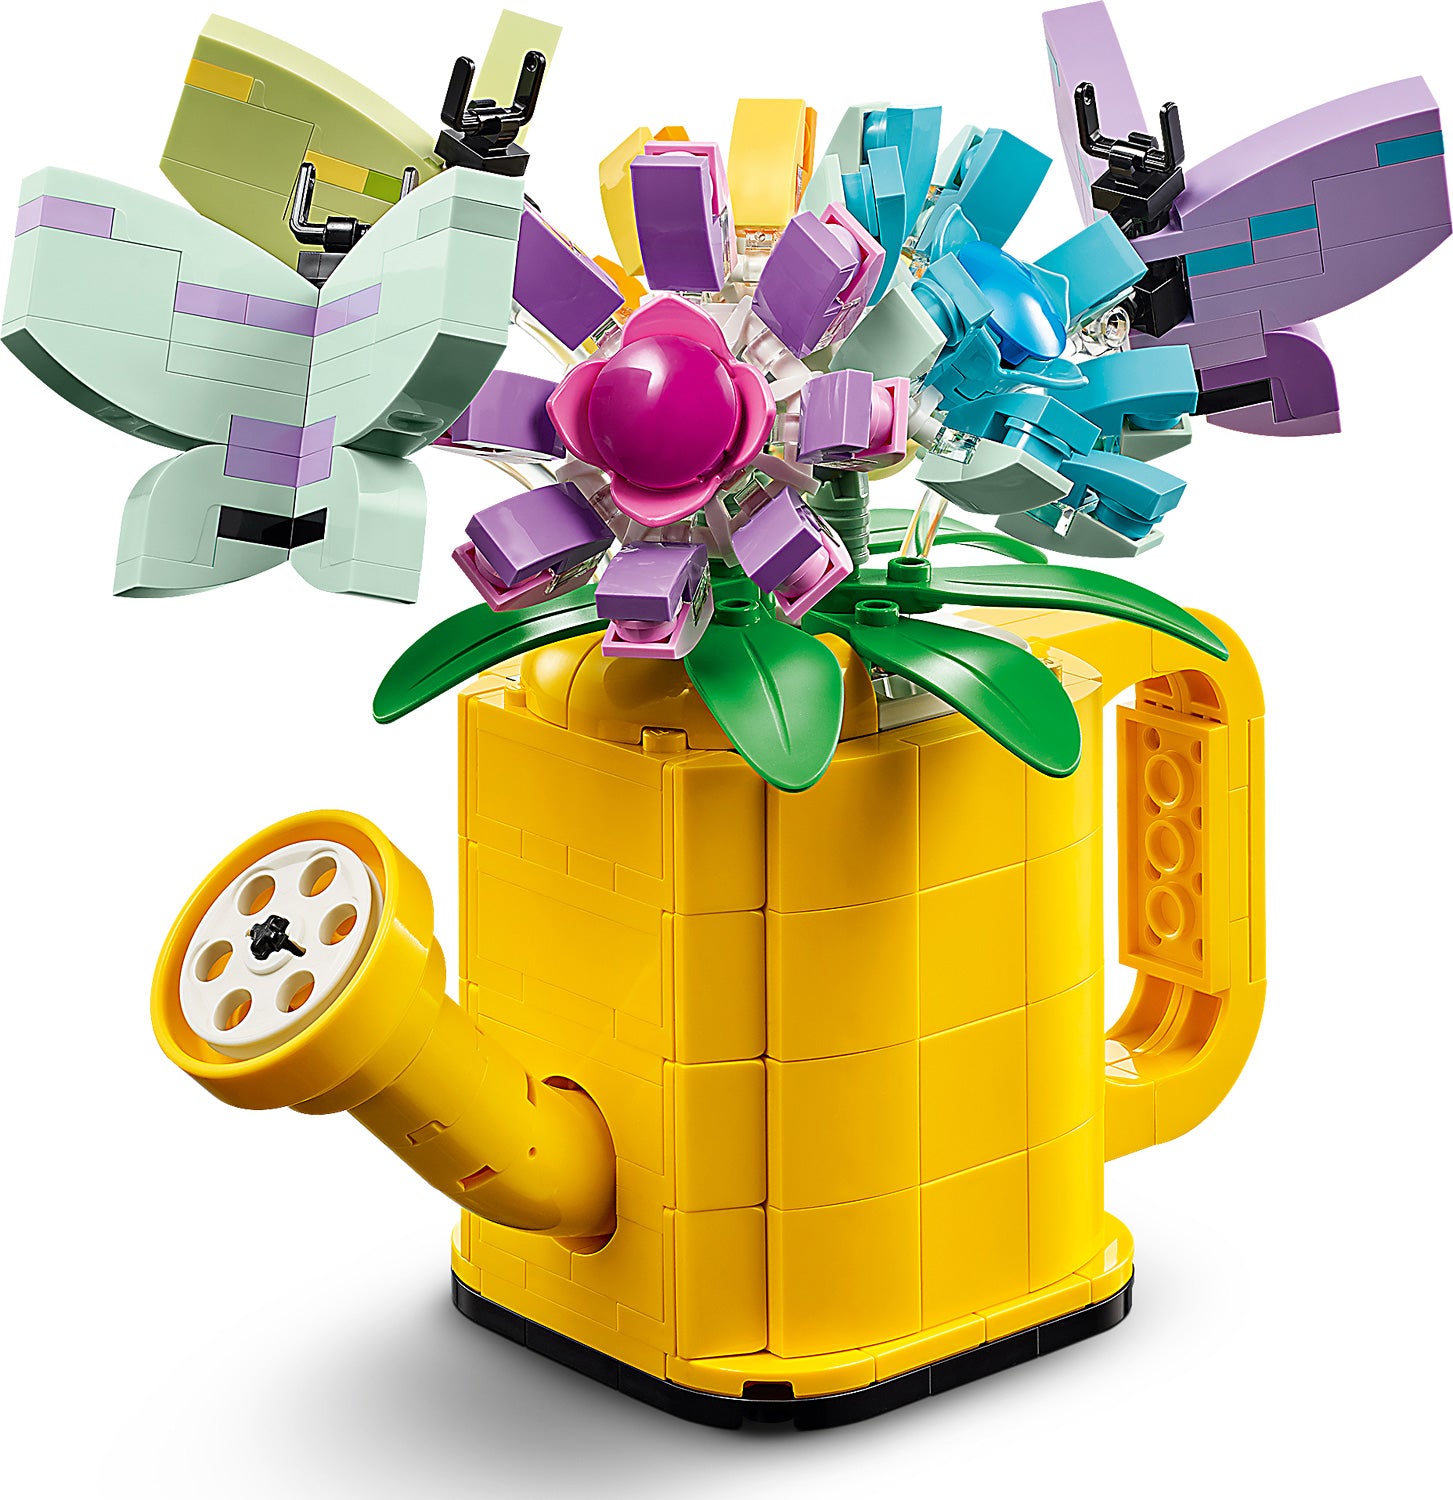 LEGO CREATOR 3-in-1 Flowers in Watering Can